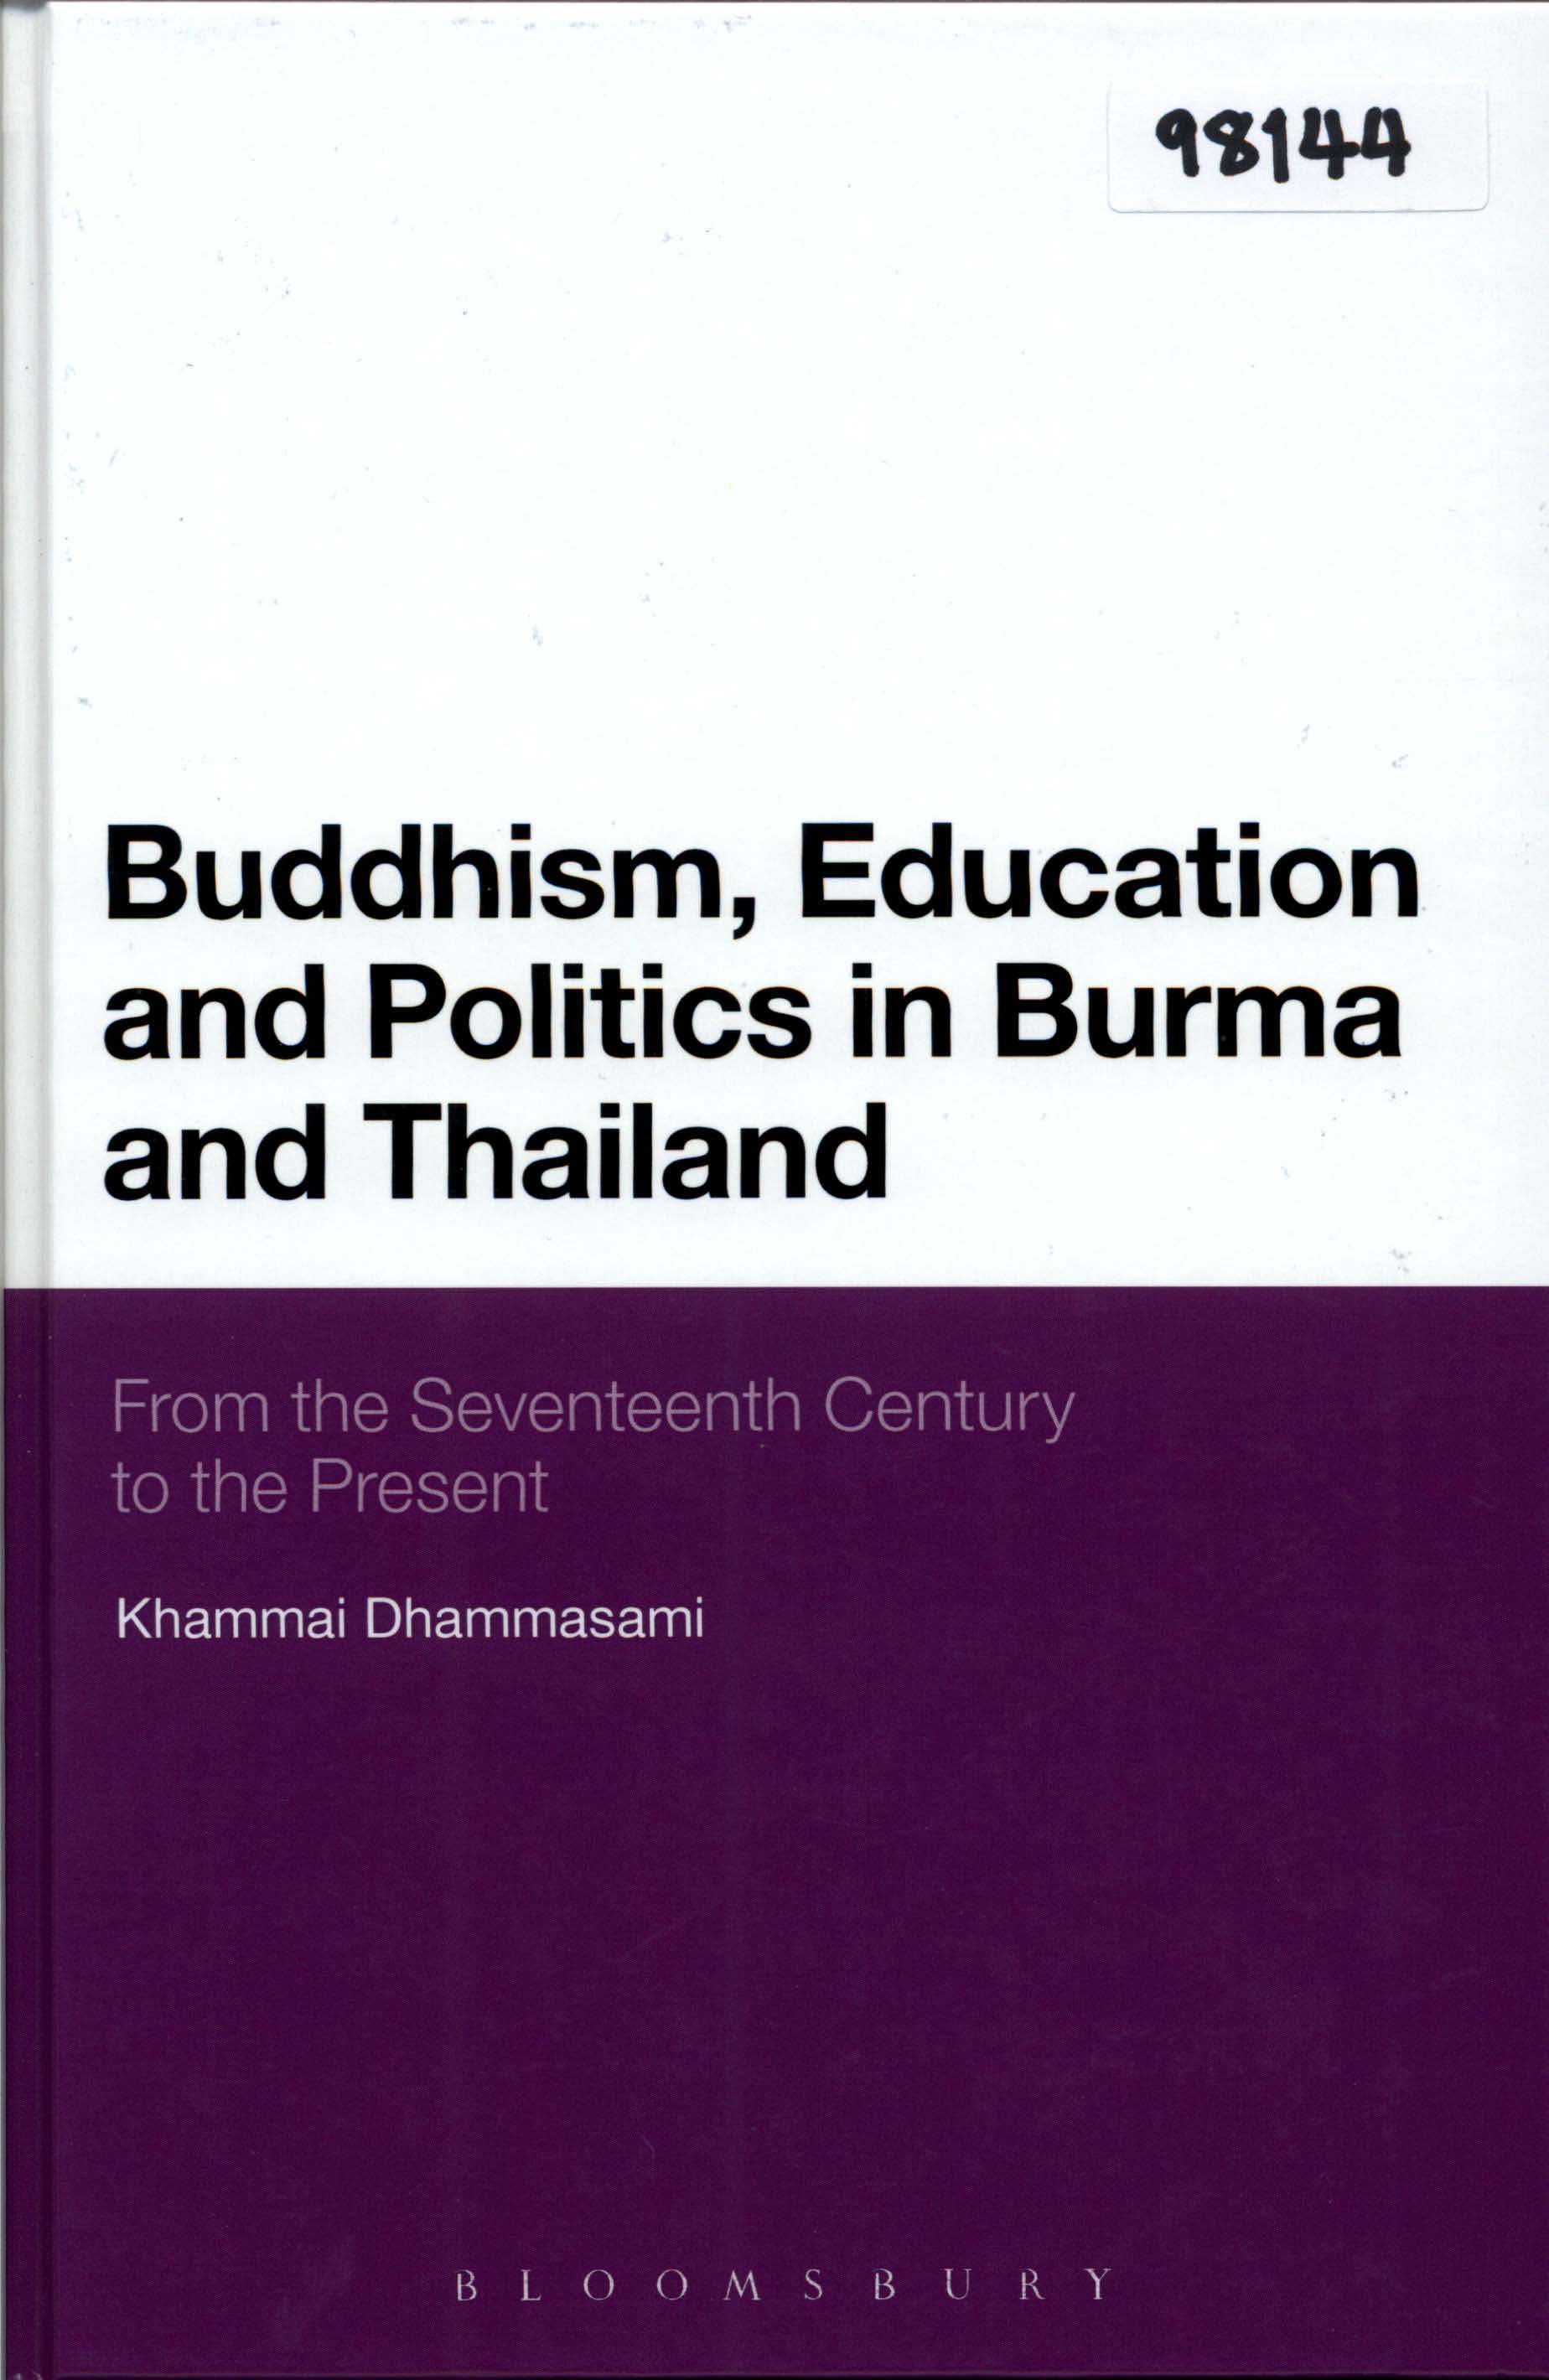 Buddhism, Education and Politics in Burma and Thailand: From the Seventeenth Century to the Present